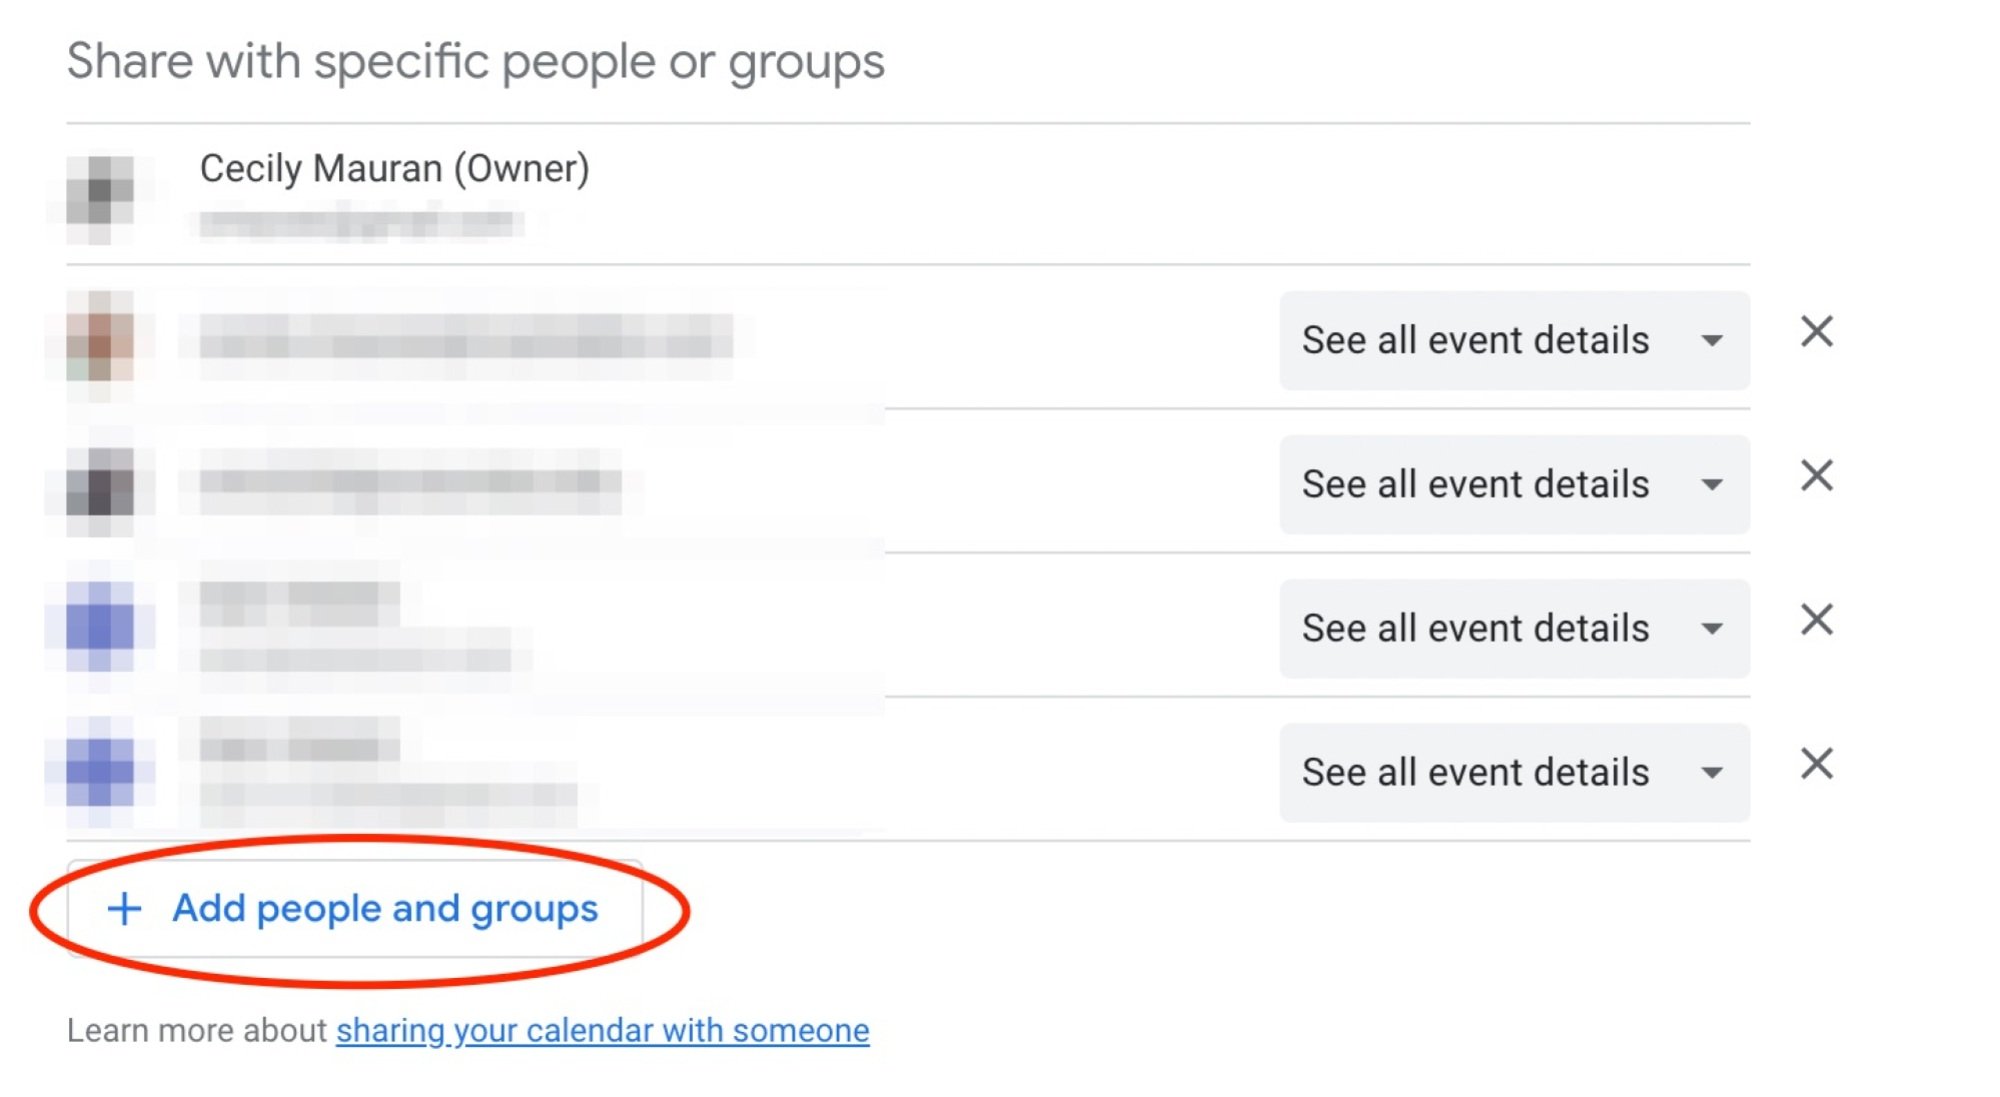 share with people section in google calendar showing an option to add people